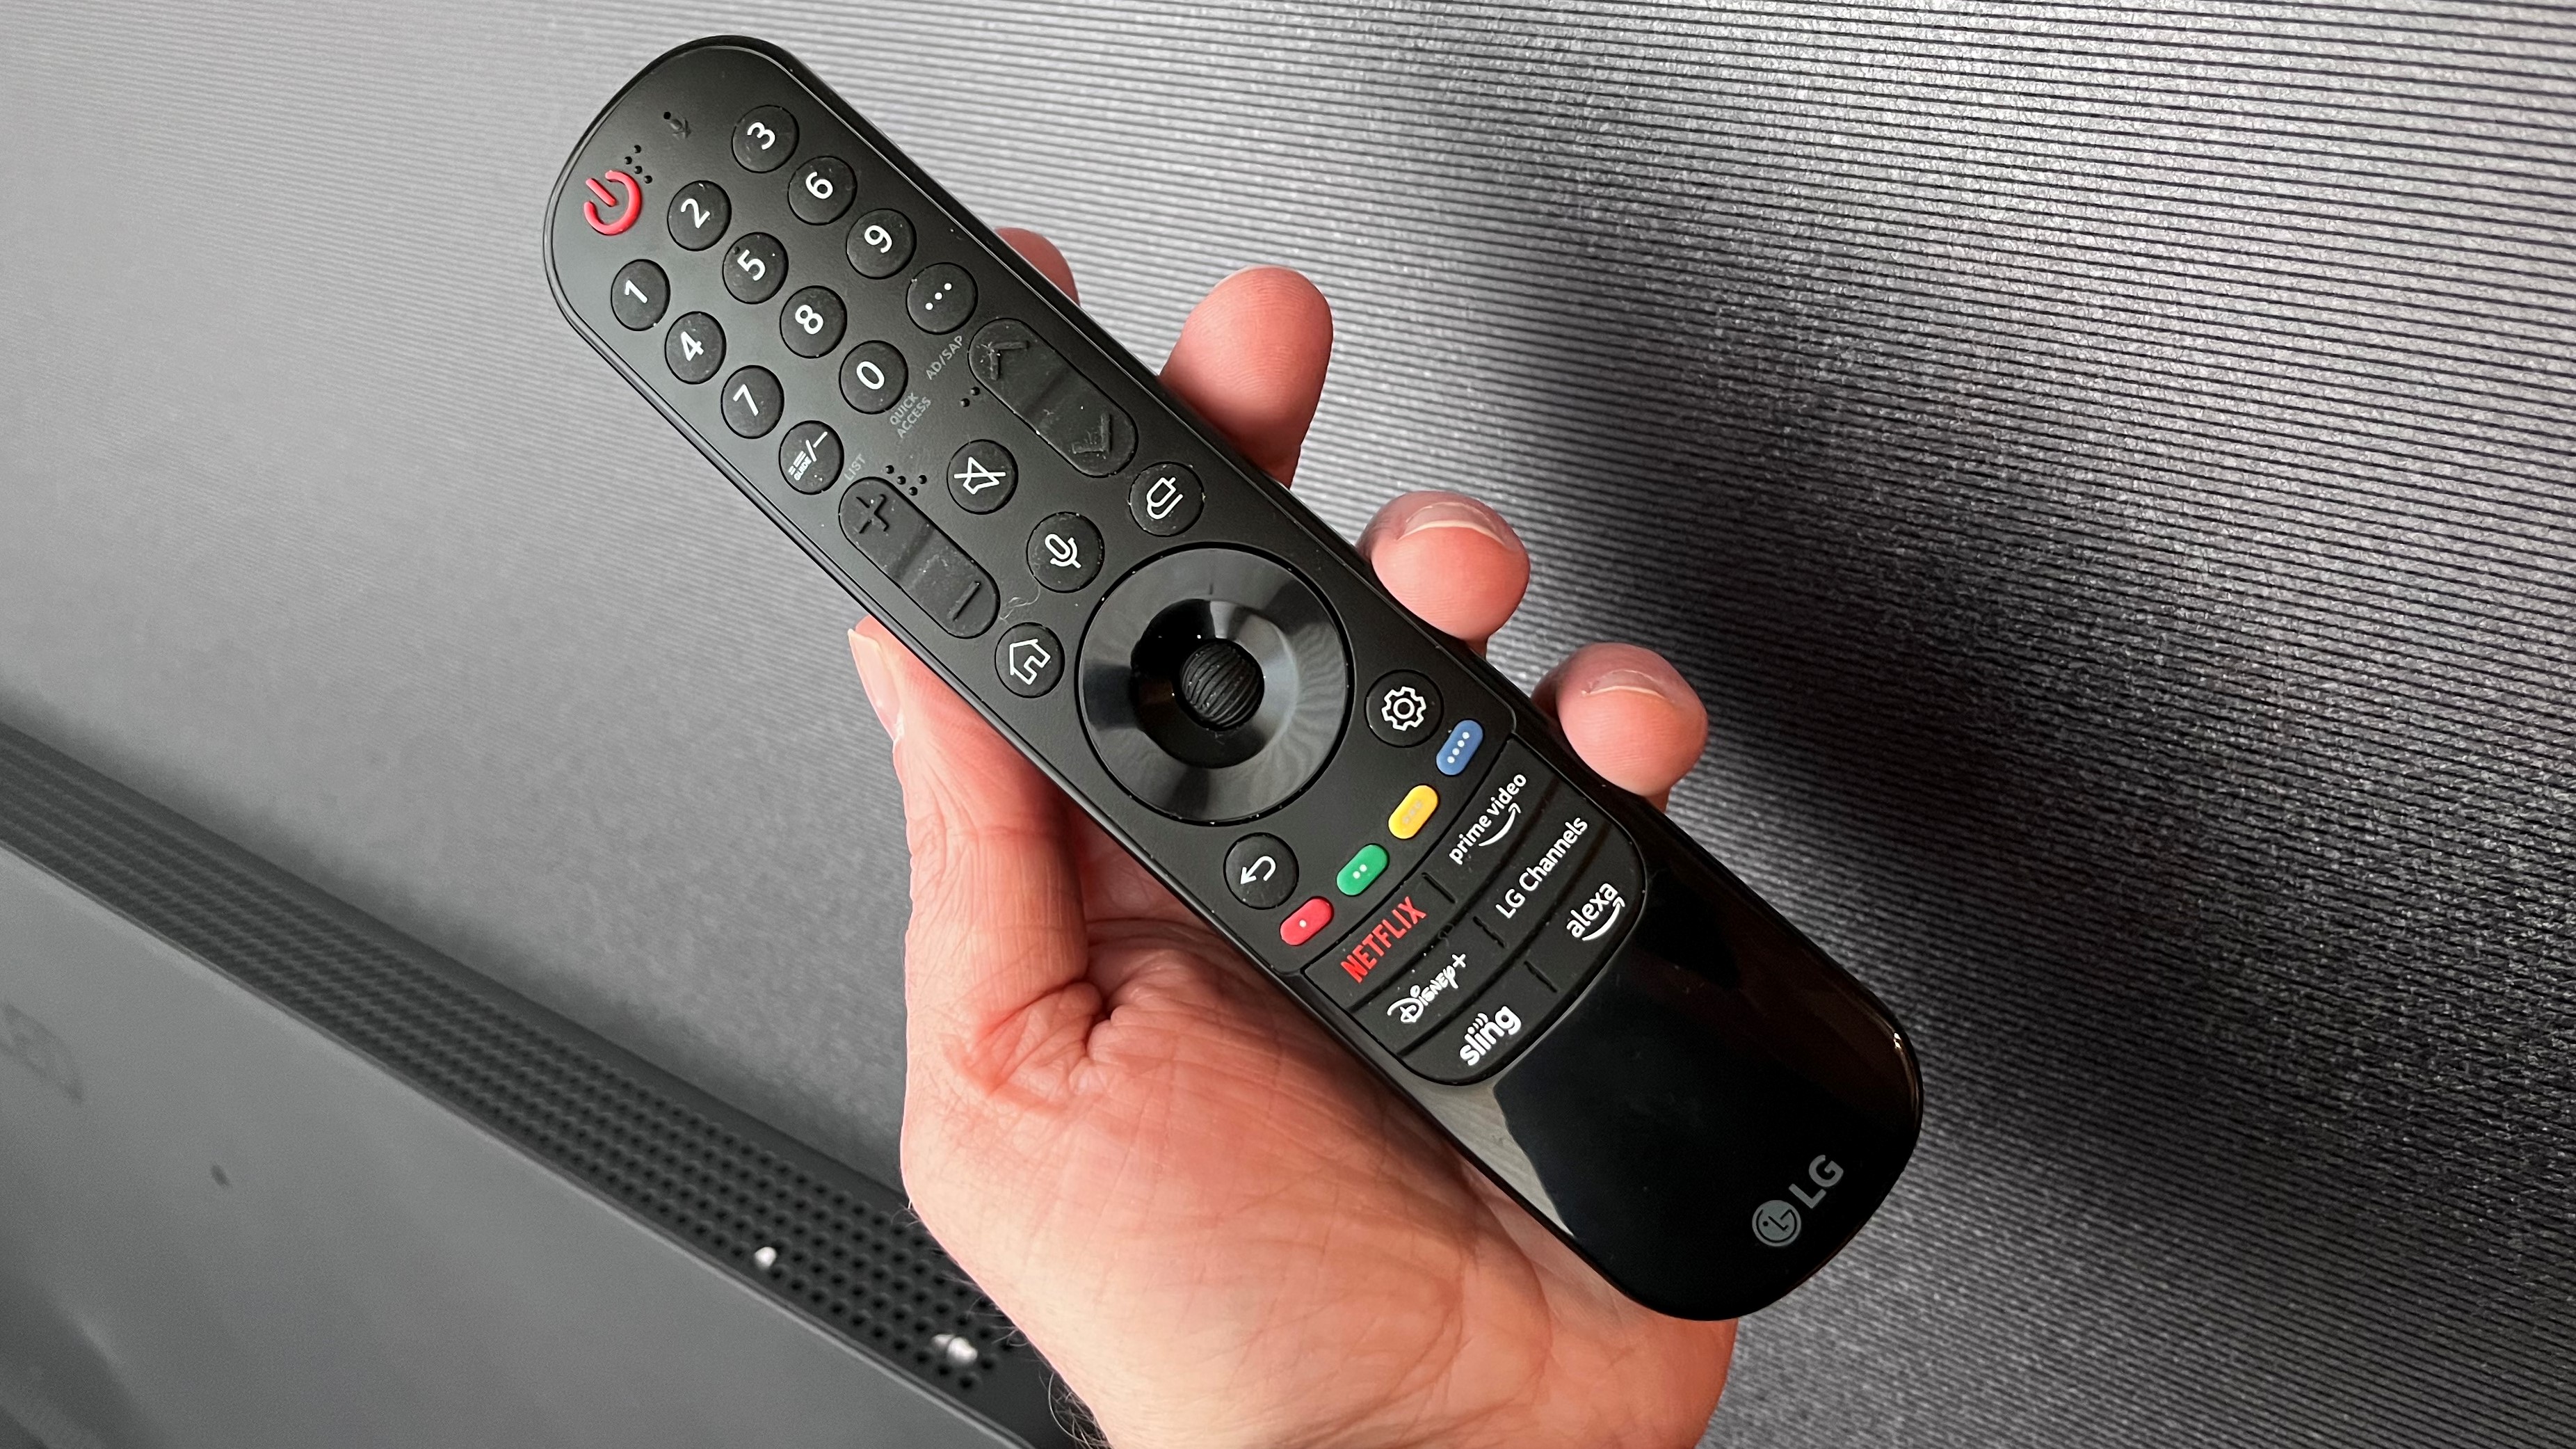 LG C3 OLED remote control held in hand